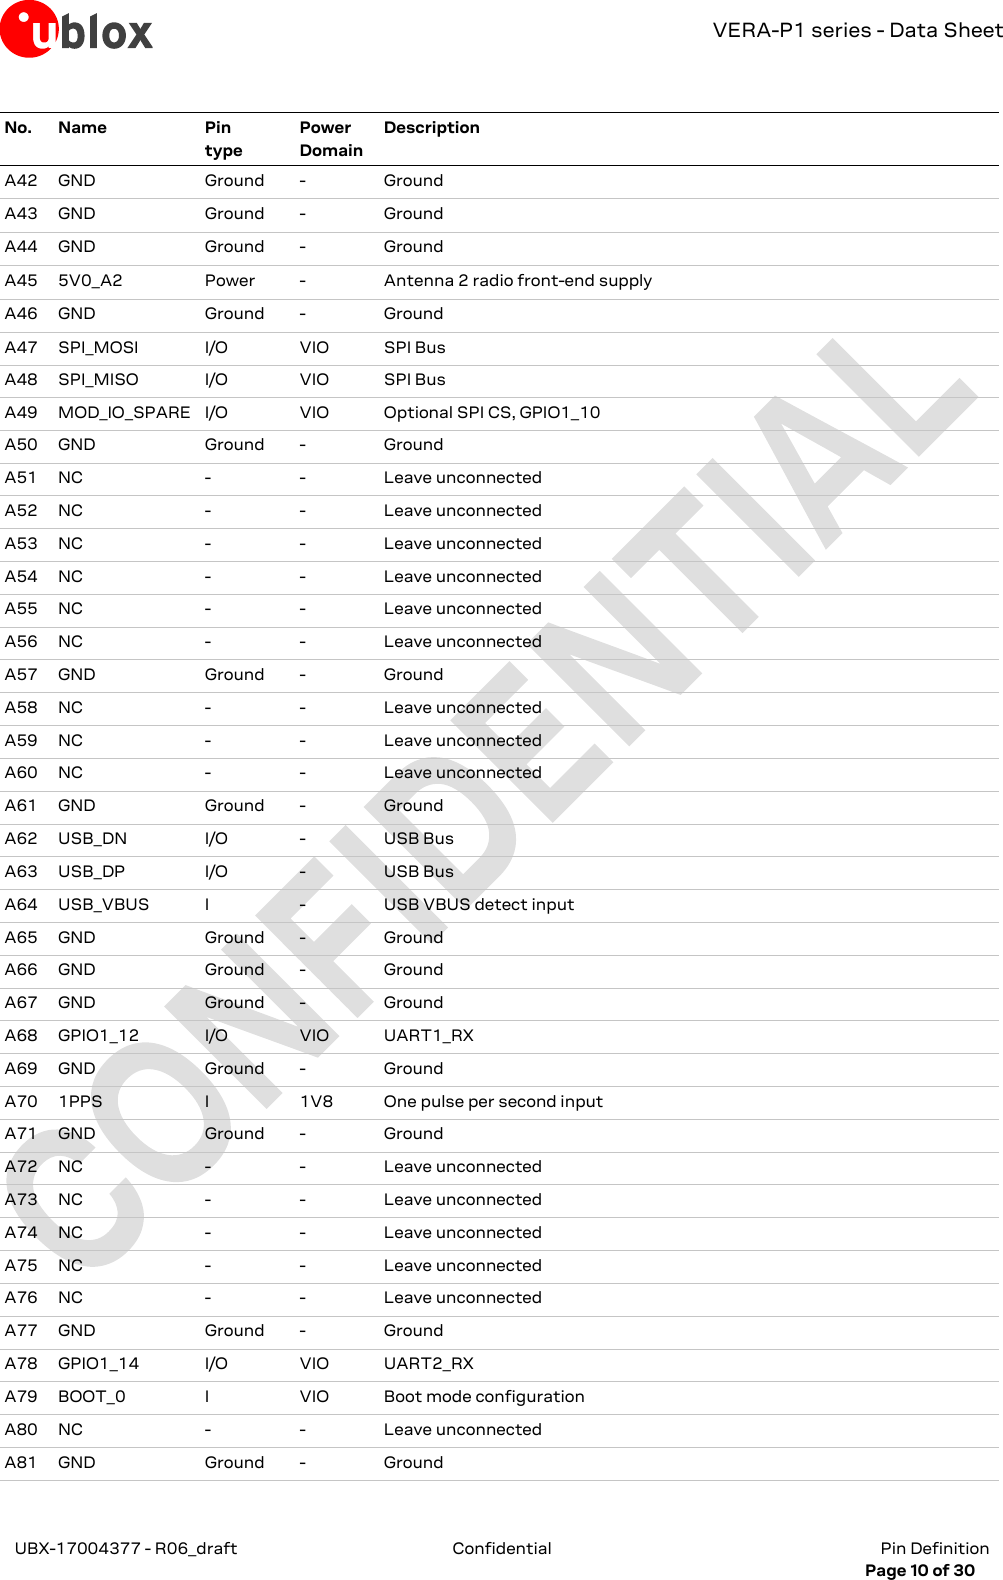 VERA-P1 series - Data Sheet UBX-17004377 - R06_draft Confidential  Pin Definition     Page 10 of 30 No. Name Pin type Power Domain Description A42 GND Ground - Ground A43 GND Ground - Ground A44 GND Ground - Ground A45 5V0_A2 Power - Antenna 2 radio front-end supply A46 GND Ground - Ground A47 SPI_MOSI I/O VIO SPI Bus A48 SPI_MISO I/O VIO SPI Bus A49 MOD_IO_SPARE I/O VIO Optional SPI CS, GPIO1_10 A50 GND Ground - Ground A51 NC - - Leave unconnected A52 NC - - Leave unconnected A53 NC - - Leave unconnected A54 NC - - Leave unconnected A55 NC - - Leave unconnected A56 NC - - Leave unconnected A57 GND Ground - Ground A58 NC - - Leave unconnected A59 NC - - Leave unconnected A60 NC - - Leave unconnected A61 GND Ground - Ground A62 USB_DN I/O - USB Bus A63 USB_DP I/O - USB Bus A64 USB_VBUS I - USB VBUS detect input A65 GND Ground - Ground A66 GND Ground - Ground A67 GND Ground - Ground A68 GPIO1_12 I/O VIO UART1_RX A69 GND Ground - Ground A70 1PPS I 1V8 One pulse per second input A71 GND Ground - Ground A72 NC - - Leave unconnected A73 NC - - Leave unconnected A74 NC - - Leave unconnected A75 NC - - Leave unconnected A76 NC - - Leave unconnected A77 GND Ground - Ground A78 GPIO1_14 I/O VIO UART2_RX A79 BOOT_0 I VIO Boot mode configuration A80 NC - - Leave unconnected A81 GND Ground - Ground 